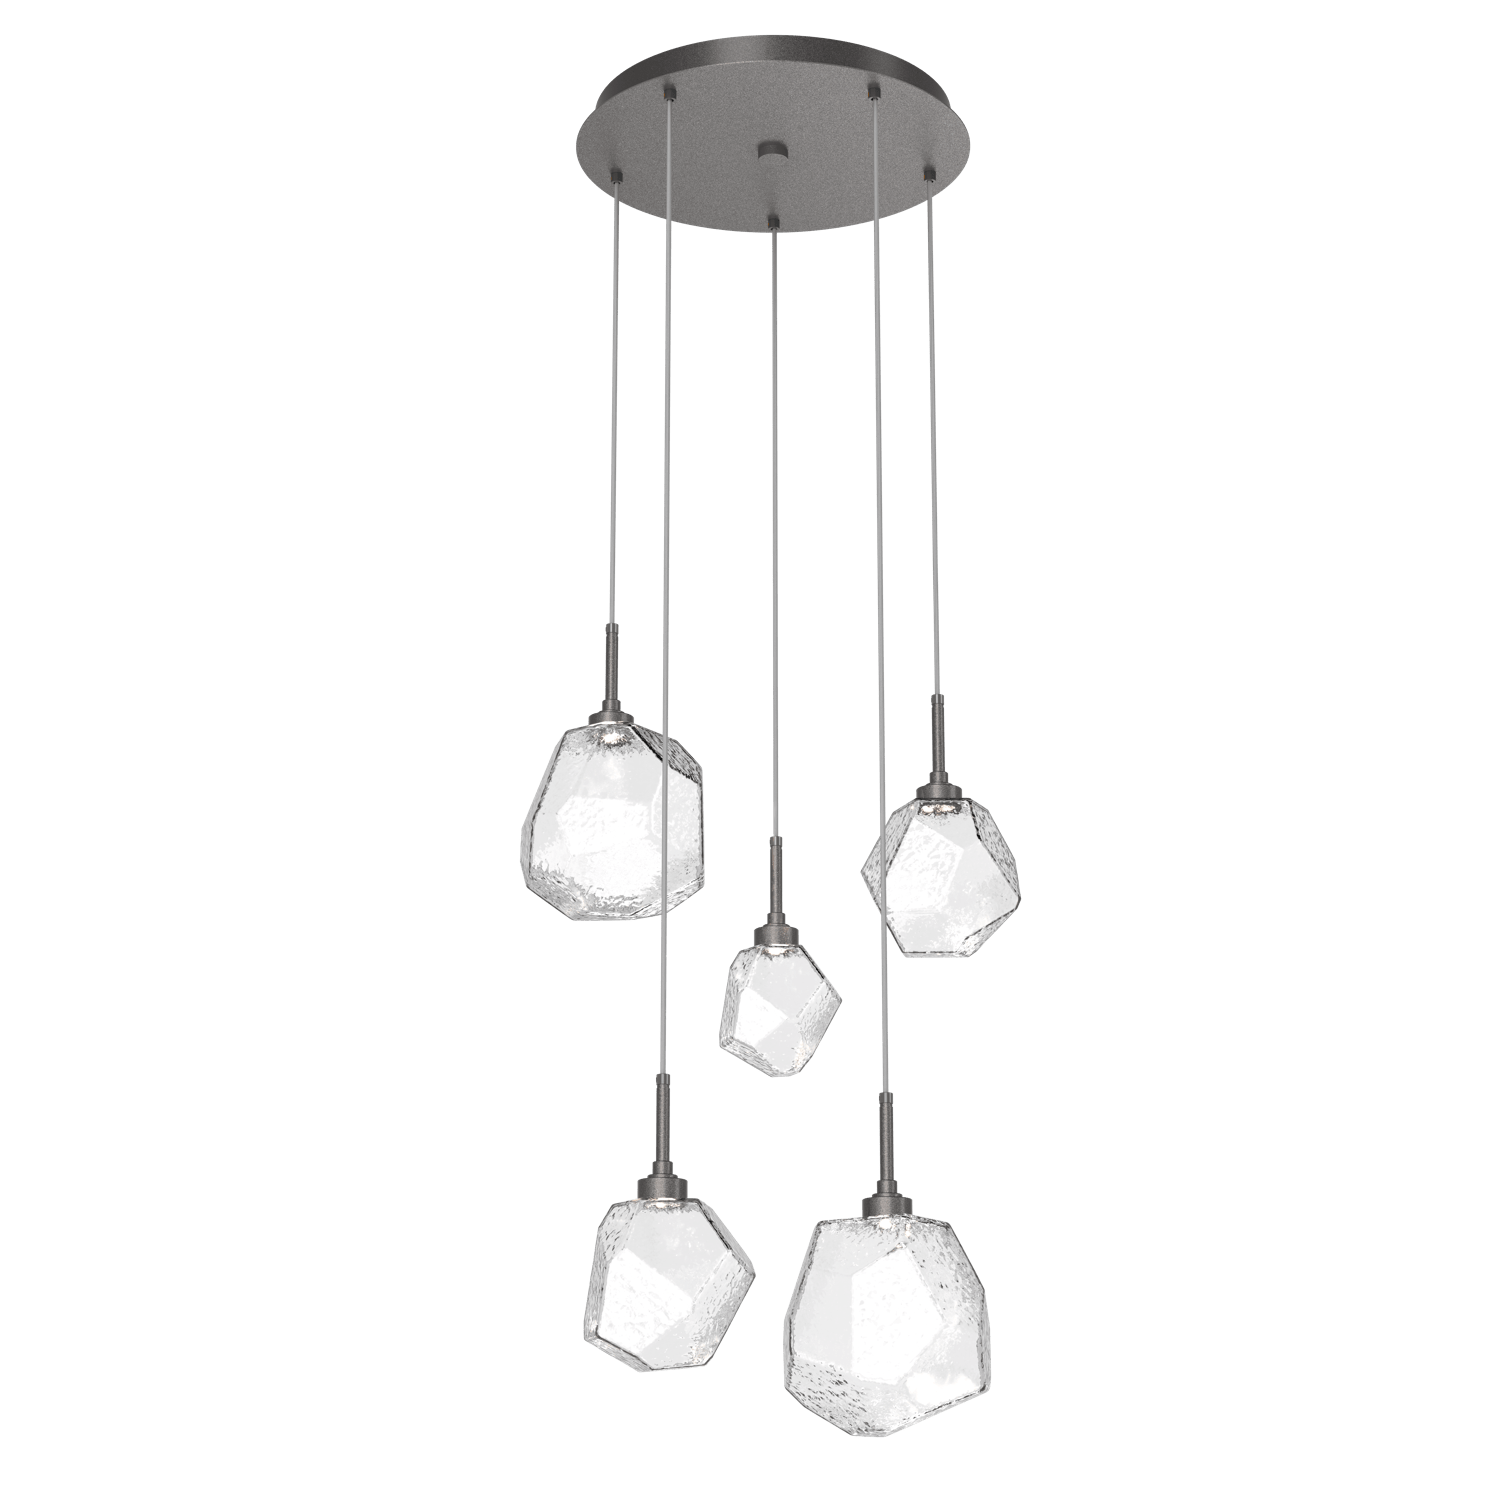 CHB0039-05-GP-C-Hammerton-Studio-Gem-5-light-round-pendant-chandelier-with-graphite-finish-and-clear-blown-glass-shades-and-LED-lamping